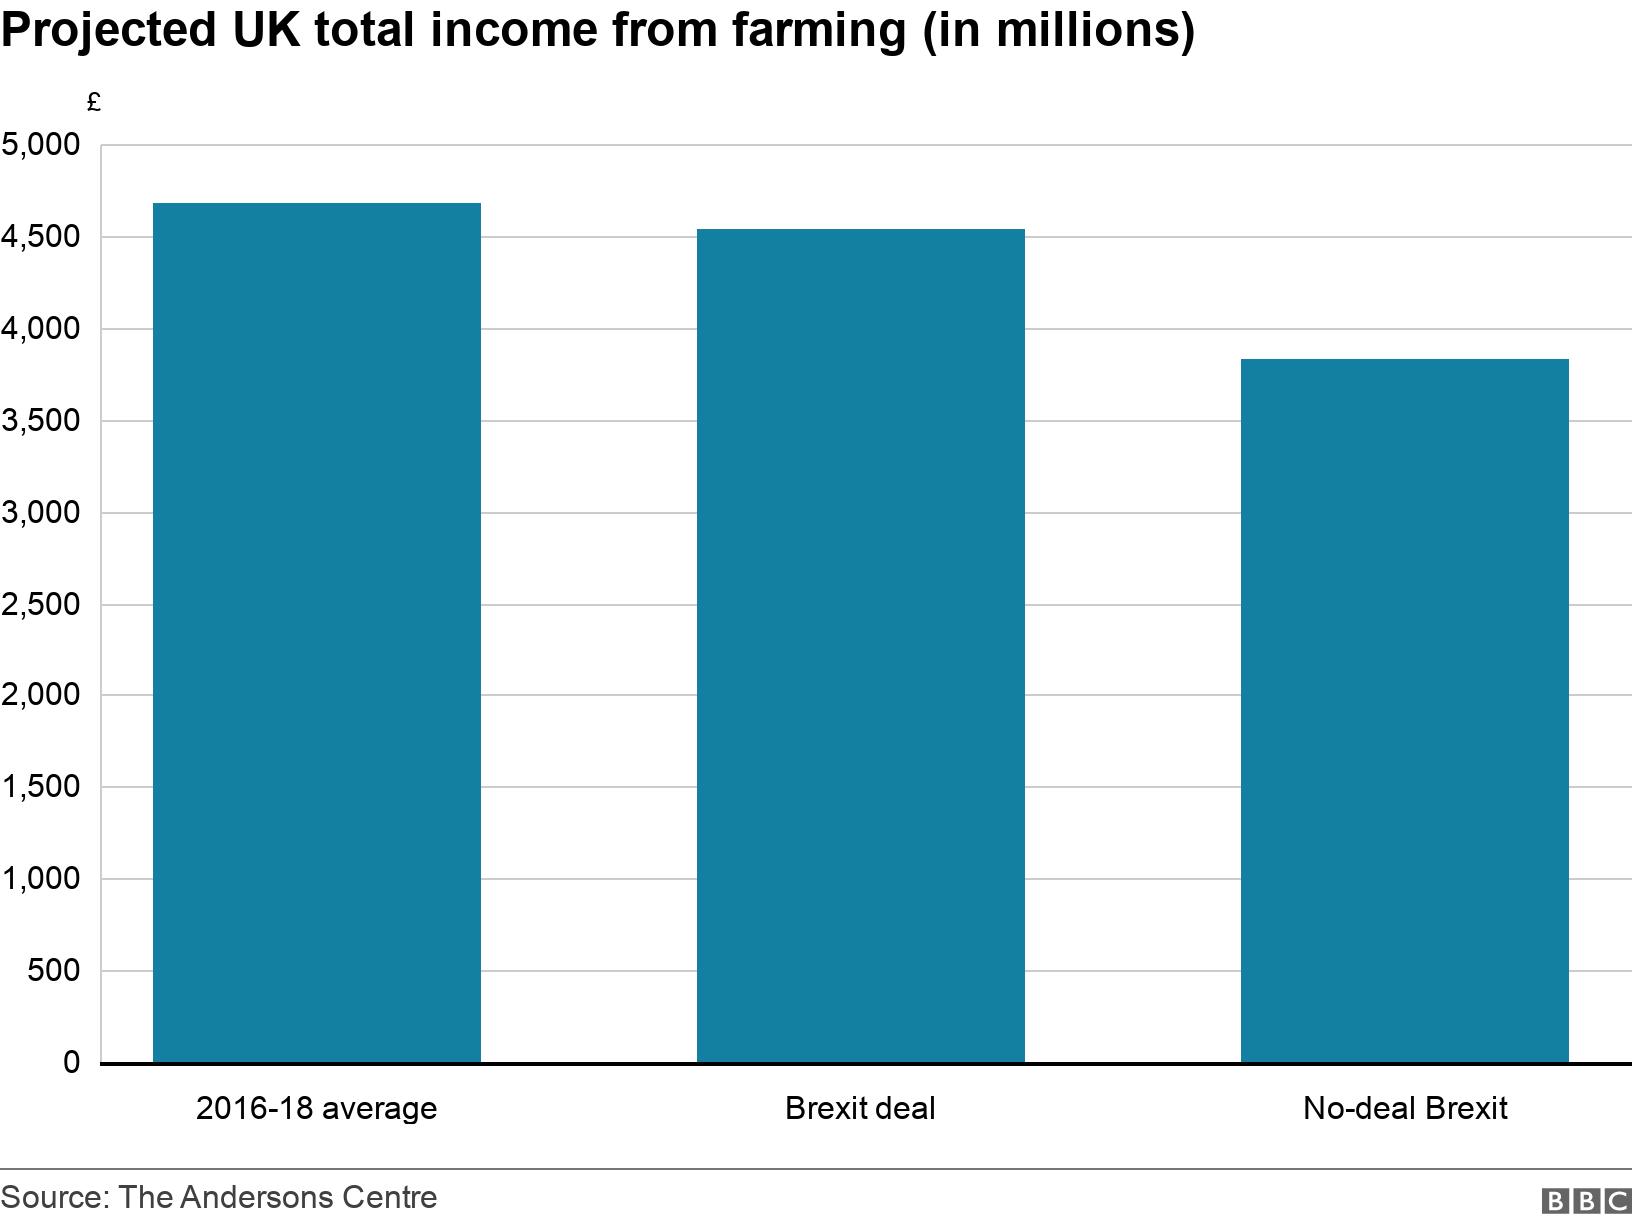 Projected UK total income from farming (in millions). . Projected UK total income from farming (in millions).
2016-18 average: 4,680
Under a Brexit deal: 4,539.6
Under a no-deal Brexit: 3,837.6 .